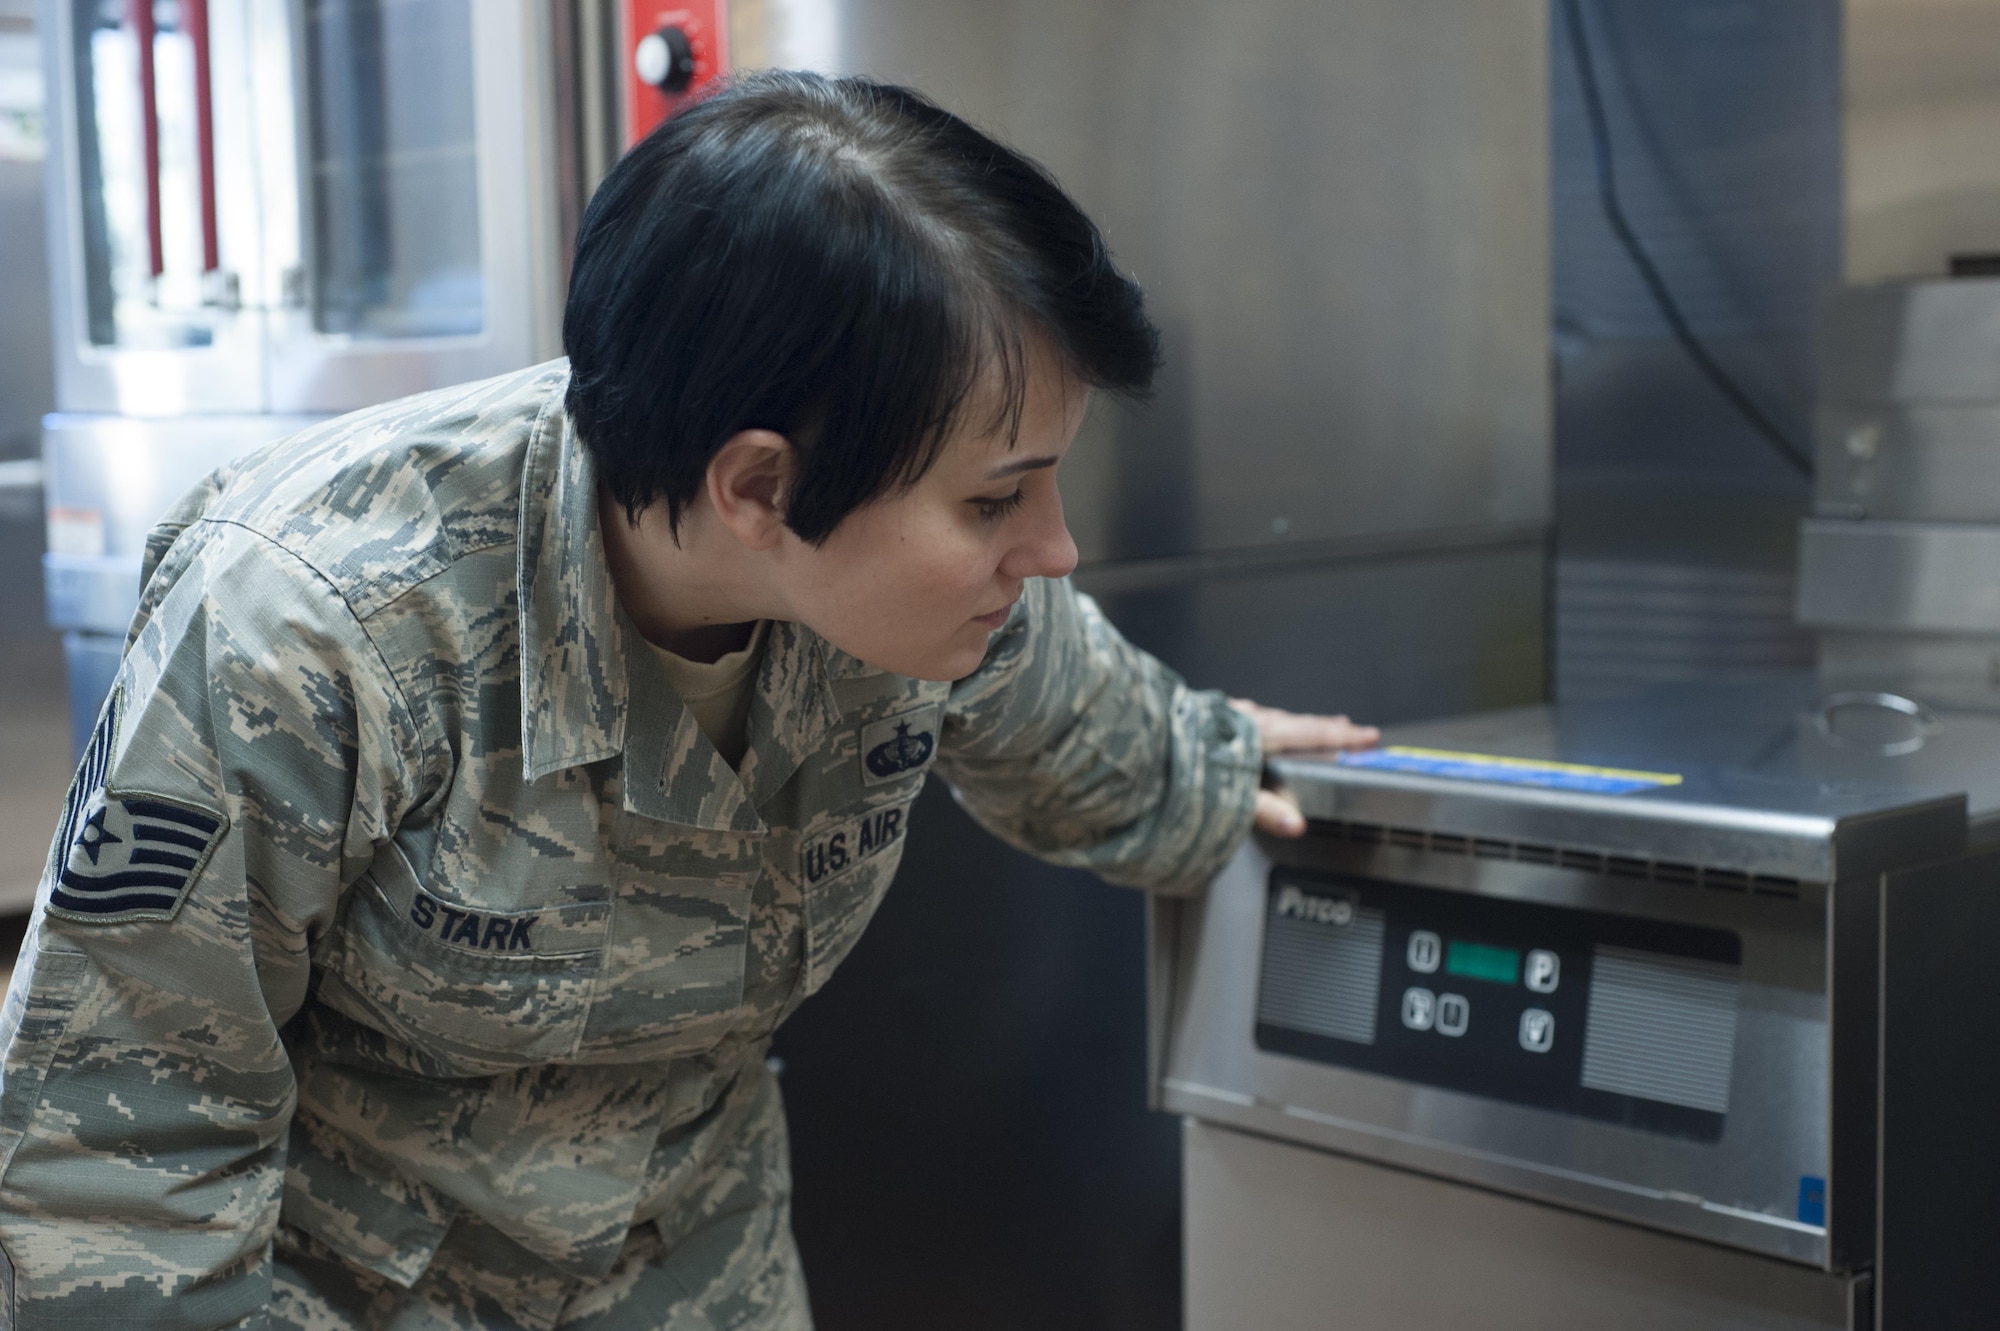 U.S. Air Force Tech. Sgt. Jerrika Stark, left, 7th Force Support Squadron community services technician, examines the equipment of the Legends Café at Dyess Air Force Base, Feb. 17, 2016. With a wealth of food management experience from being the Longhorn Dining Facility manager, Stark is assigned to the Legends Café to help pass on her knowledge so it can expand successfully into a full-fledged restaurant in the future. (U.S. Air Force photo by Rebecca Van Syoc)